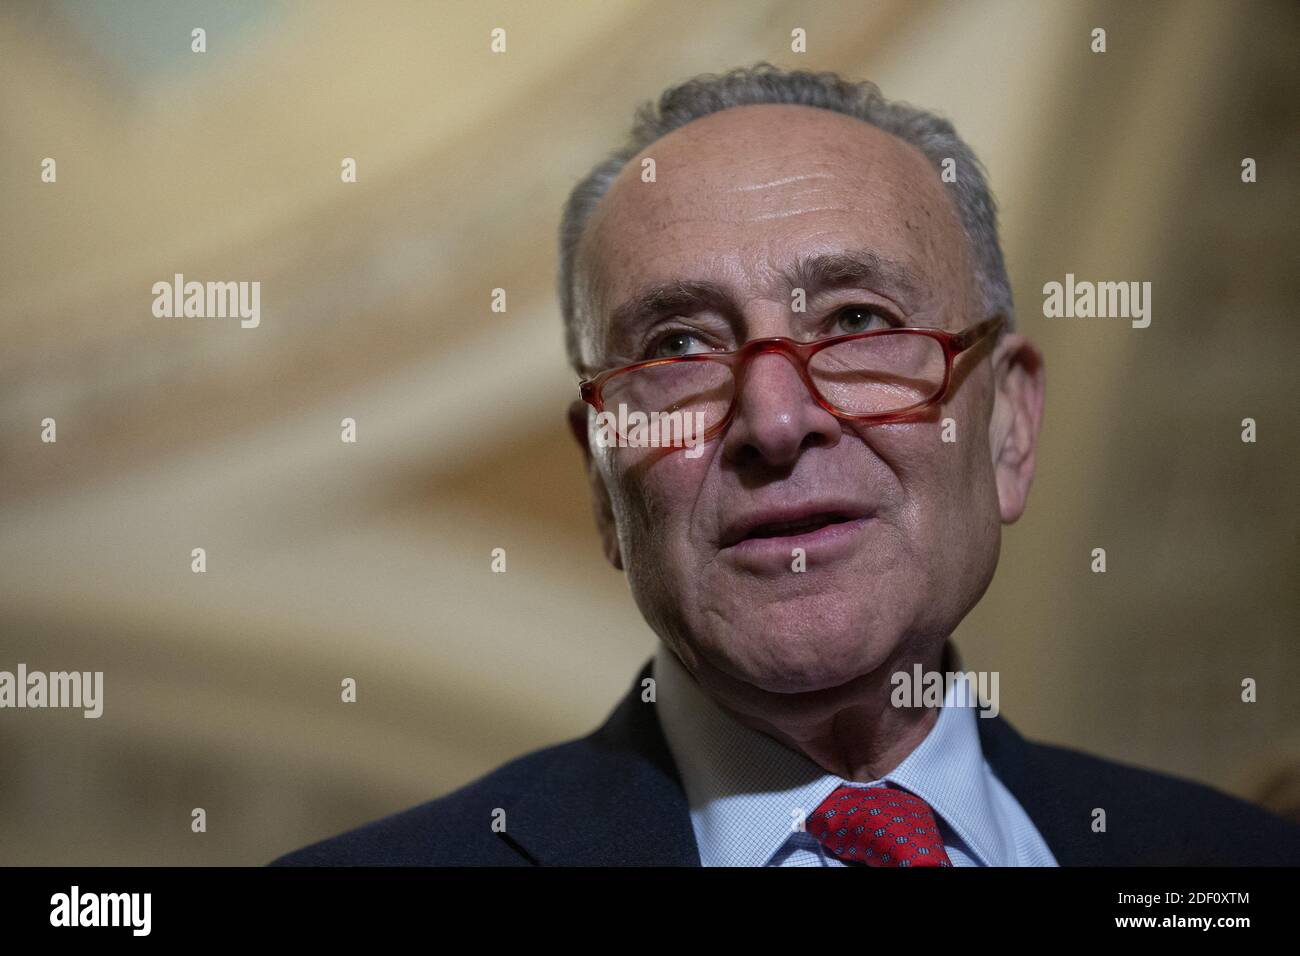 United States Senate Minority Leader Chuck Schumer (Democrat of New York) speaks to members of the media following policy luncheons at the United States Capitol in Washington, DC, USA, on Tuesday, January 14, 2020. The Senate is preparing for the impeachment trial of United States President Donald J. Trump, after Speaker of the United States House of Representatives Nancy Pelosi (Democrat of California) stated today that she will send over the two articles on Wednesday. Photo by Stefani Reynolds/CNP/ABACAPRESS.COM Stock Photo